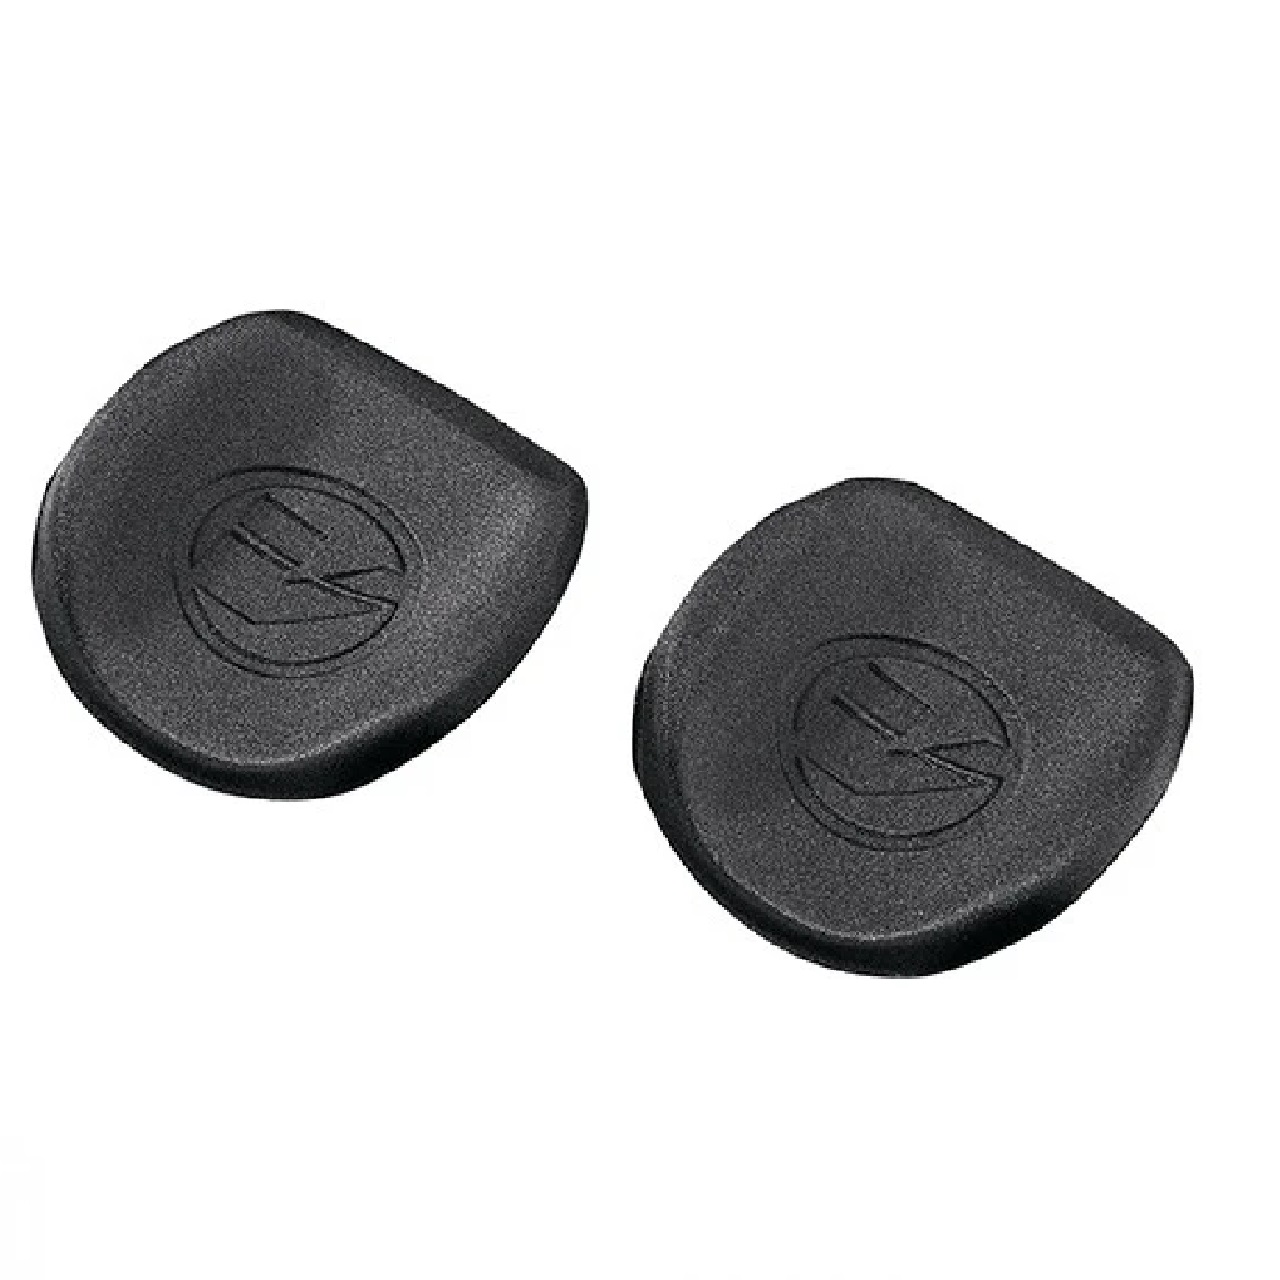 Vision Replacement R25 Race Armrest Pads for AeroBars-MS084